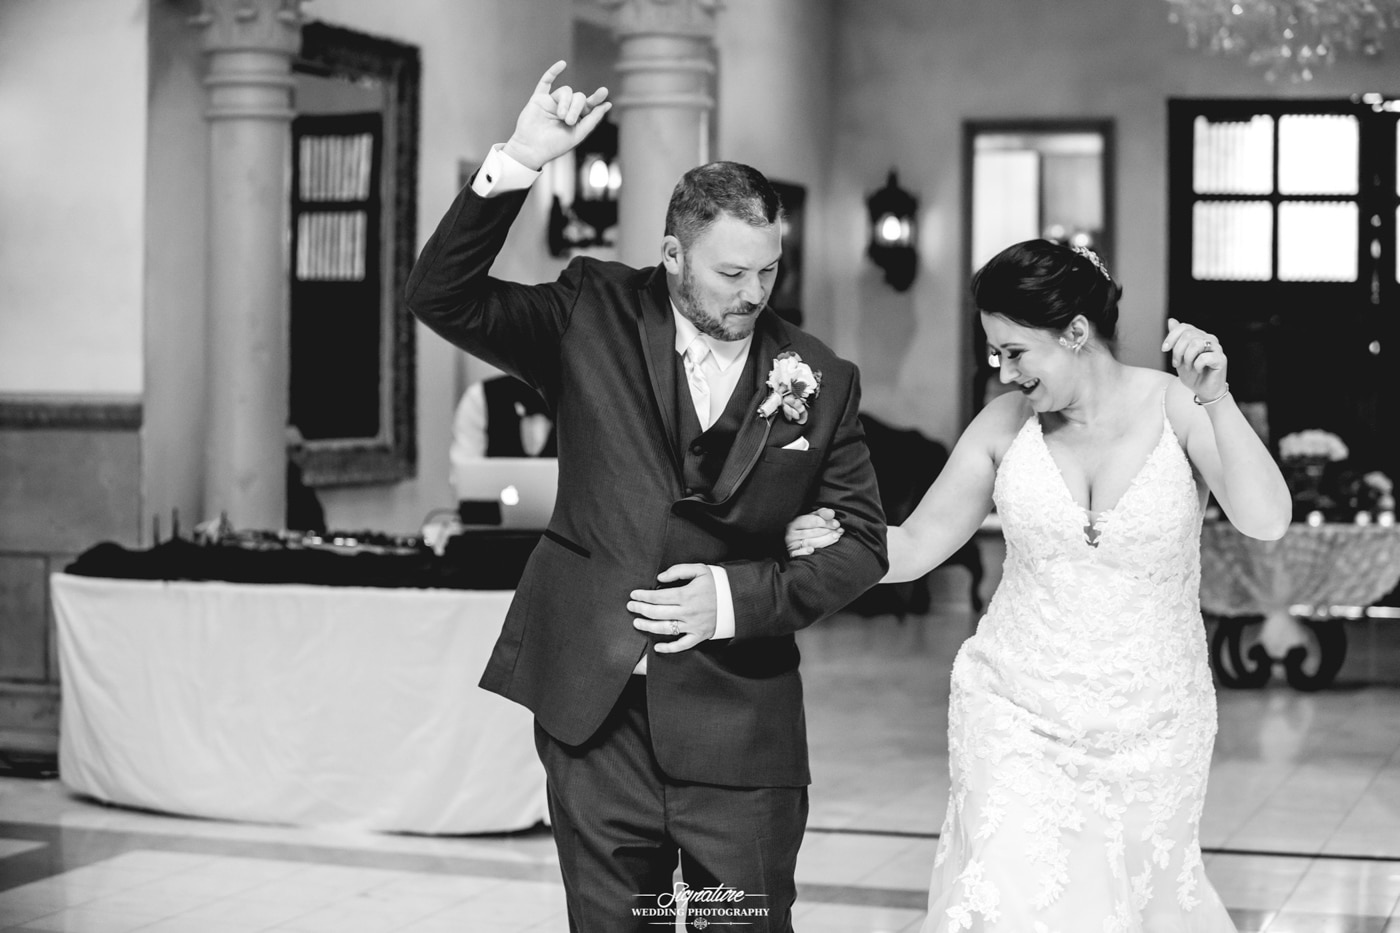 Bride and groom fun dancing black and white